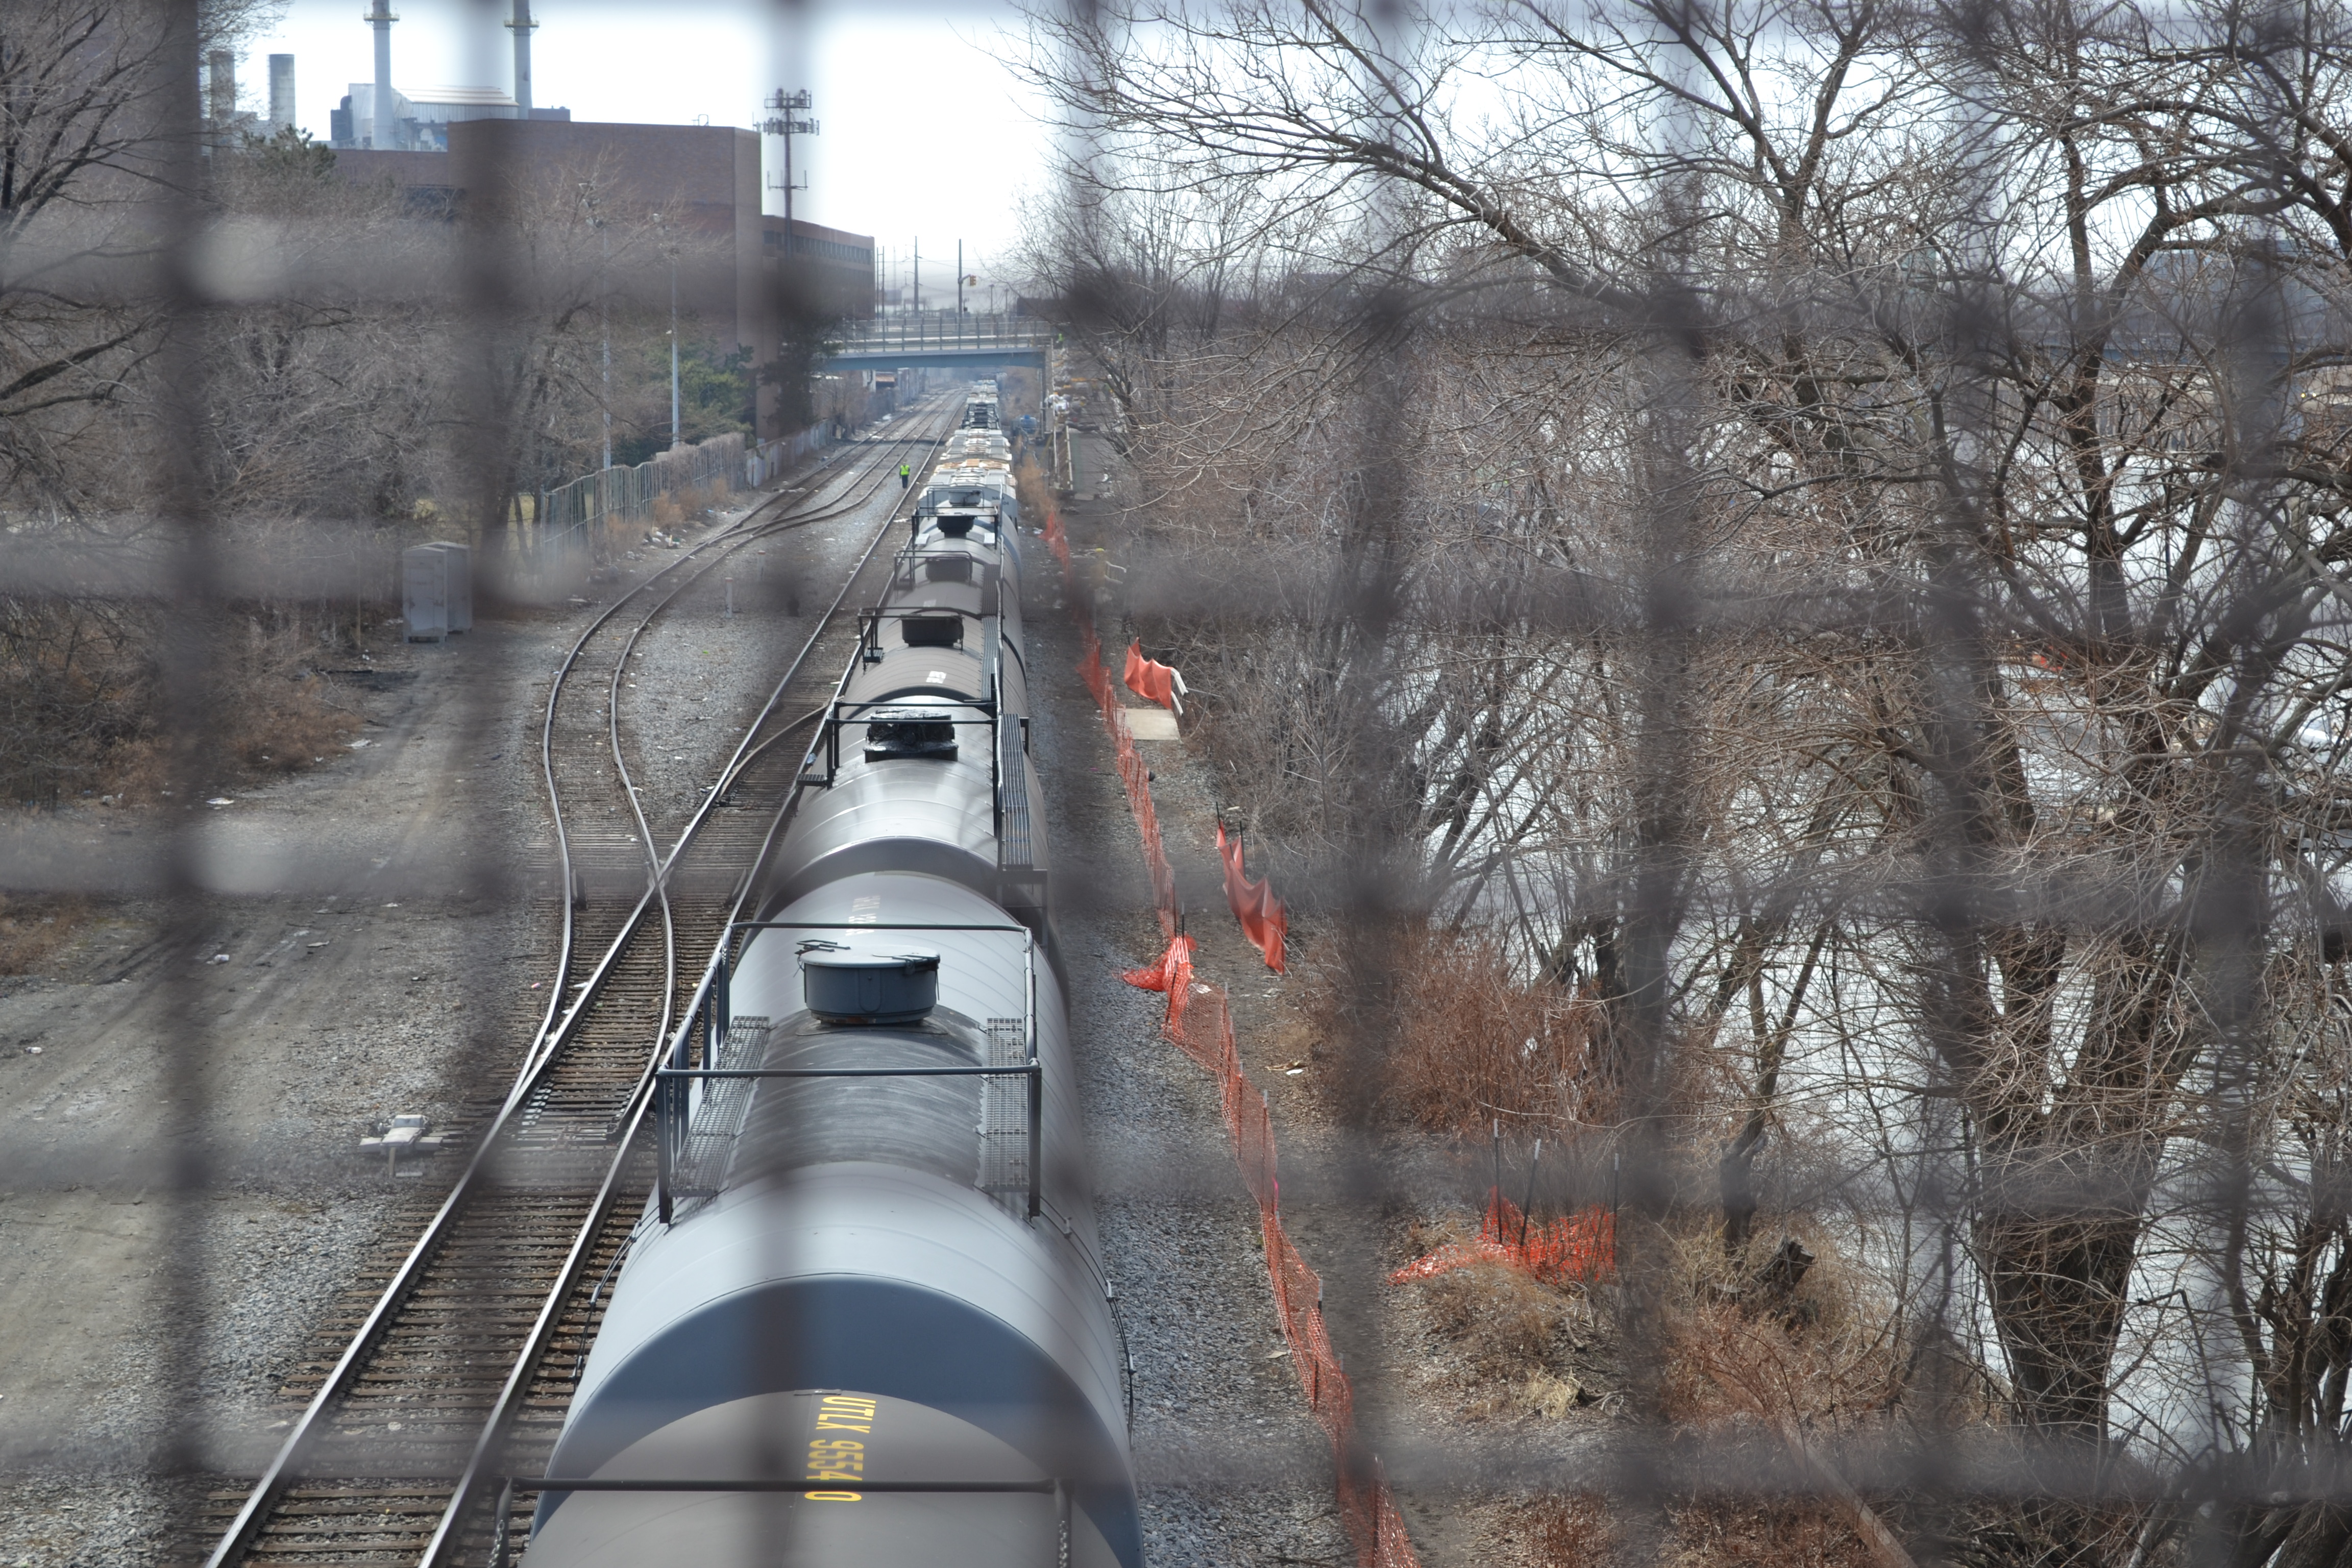 Freight cars stretch back as far as the eye can see on tracks along the Schuylkill River